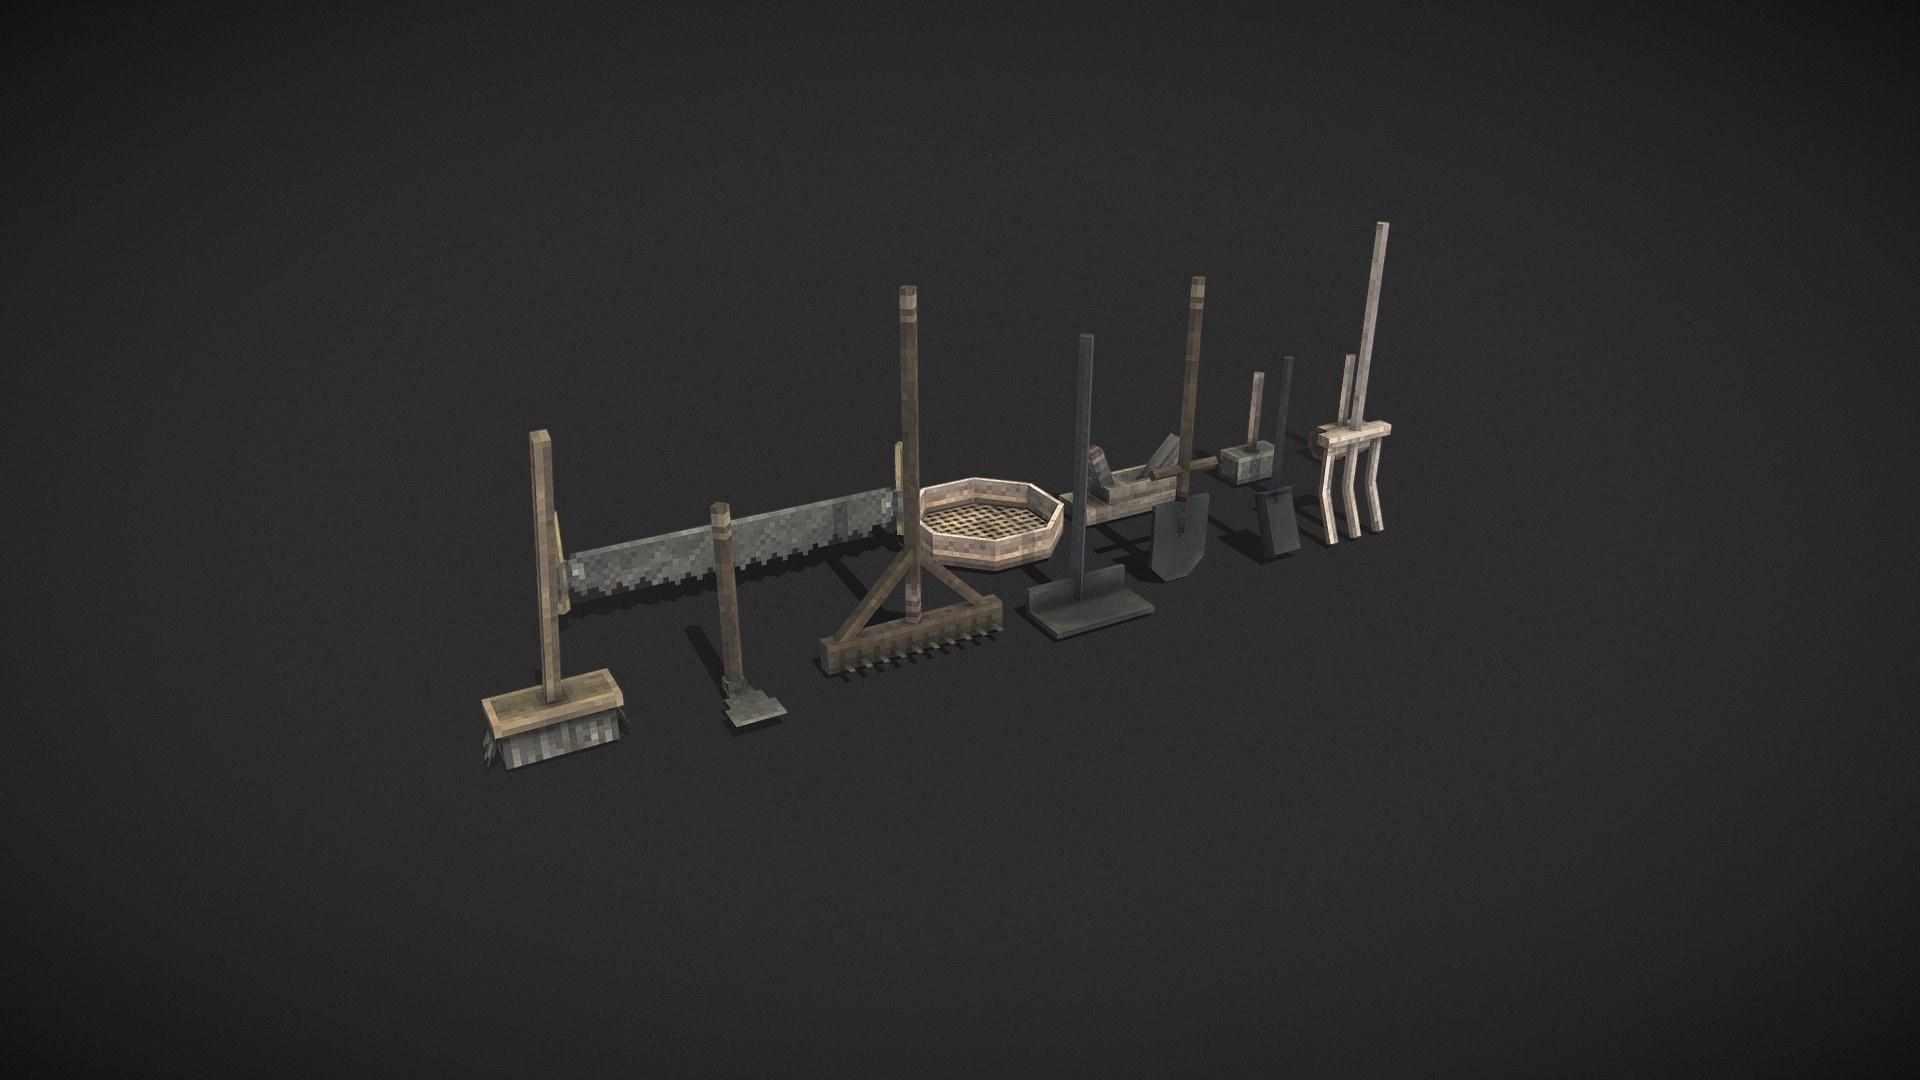 Shovels, rakes, hammers, pitchfork, broom, saw and so many other medieval style villagers tools - Conquest Reforged Props - 5 - 3D model by Smaug (@smaugthedeceiver) 3d model